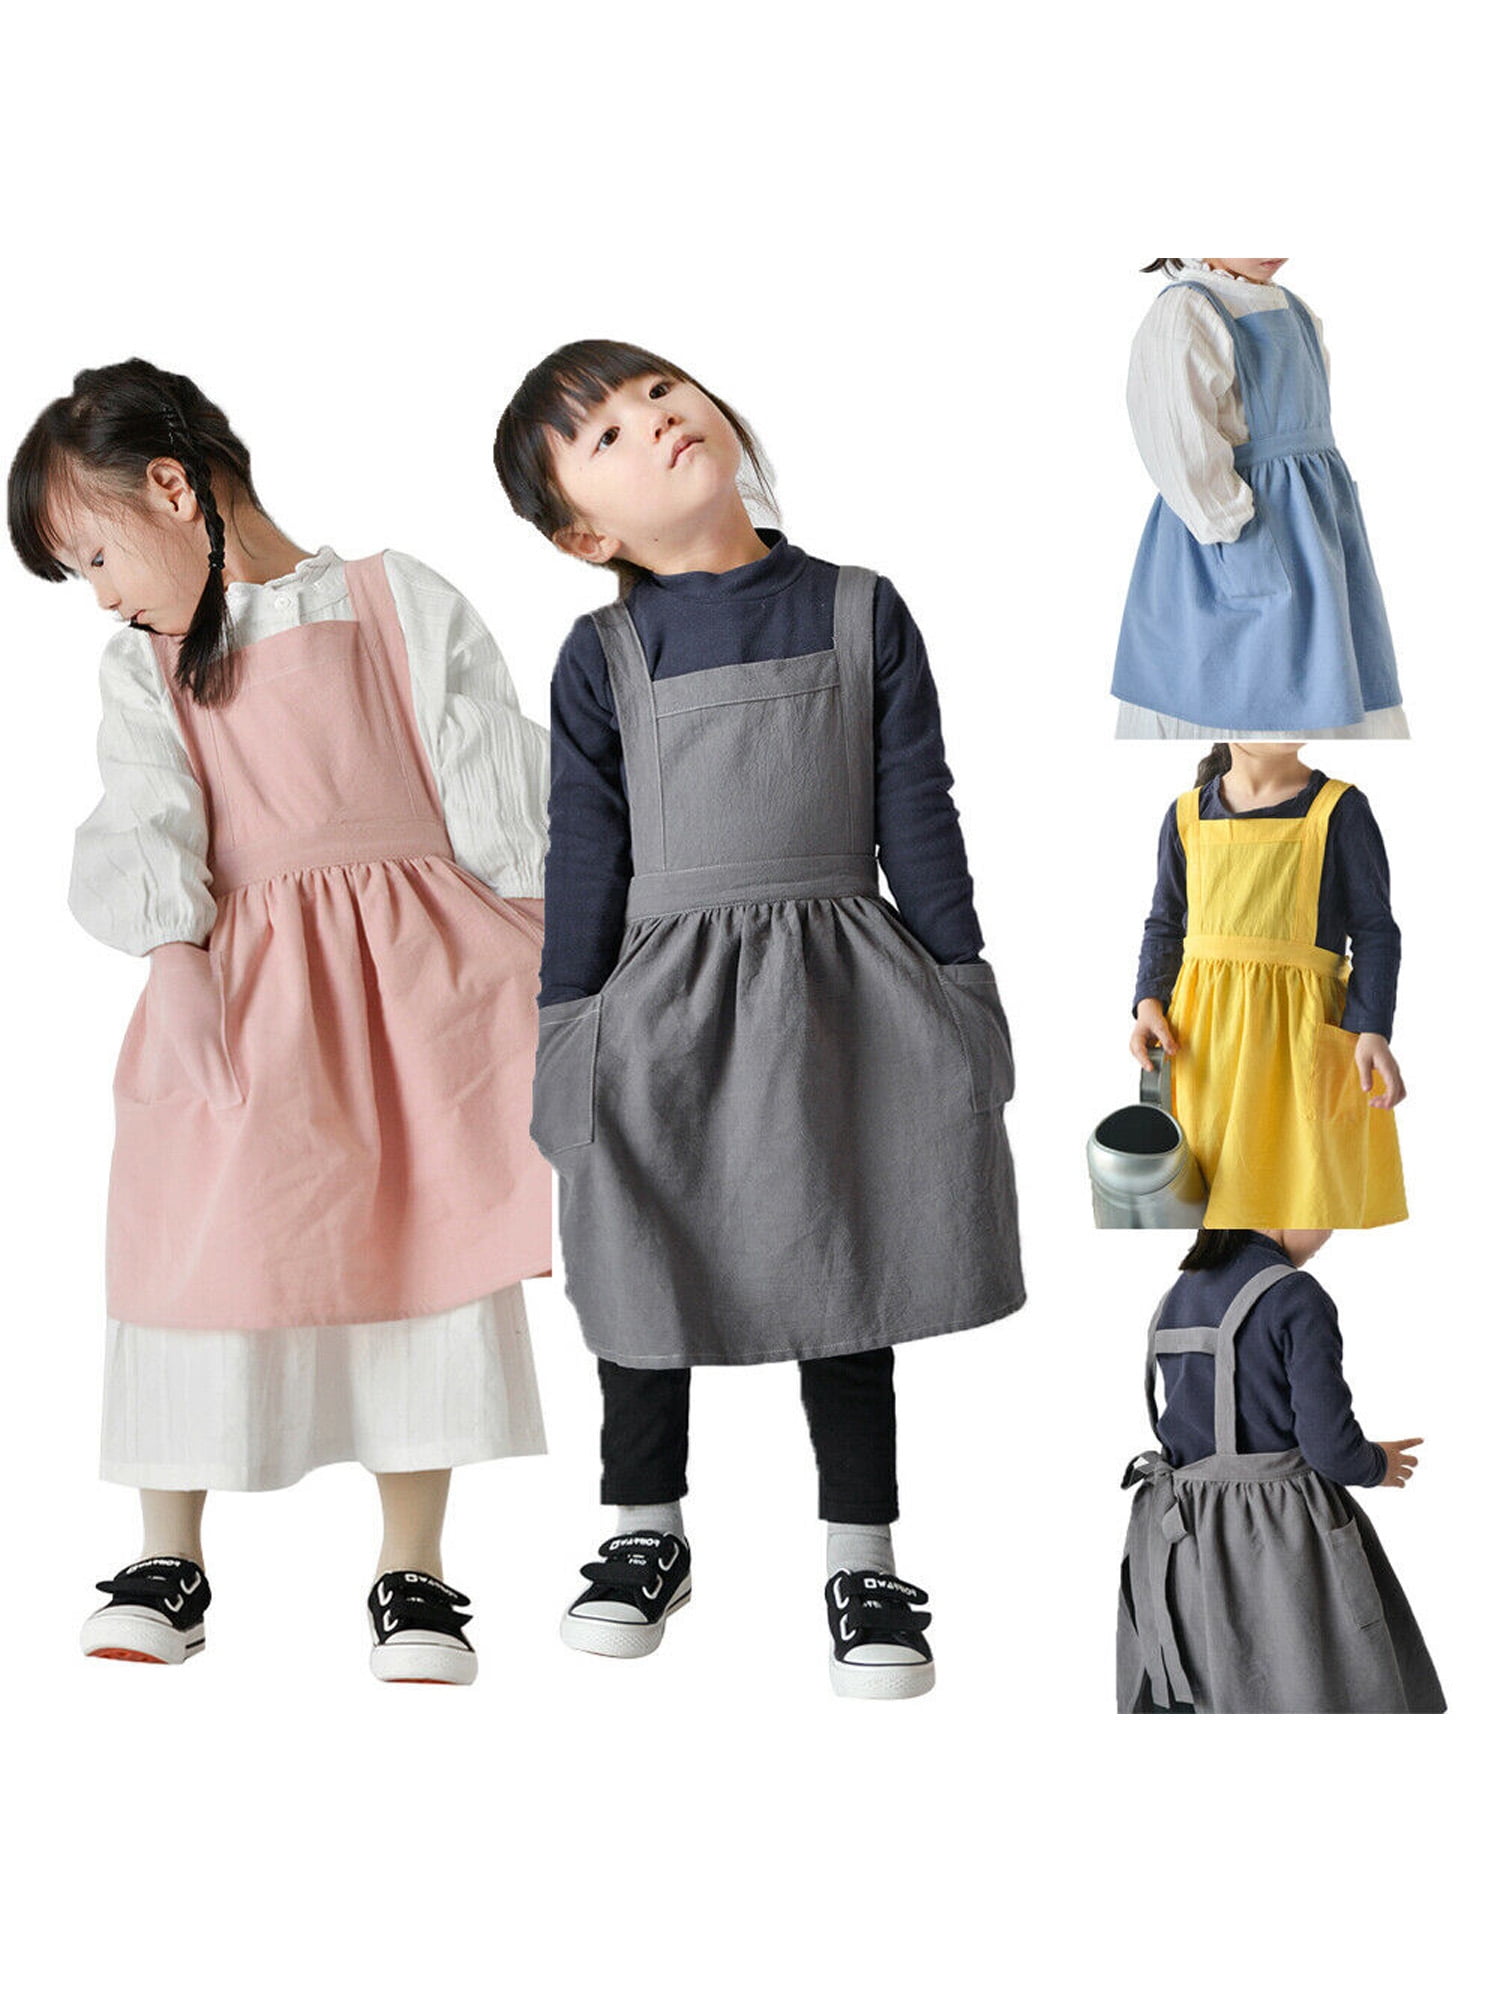 BABYBOET Girls and Boys Kids Apron Toddler Apron with Pocket for Painting  Coo